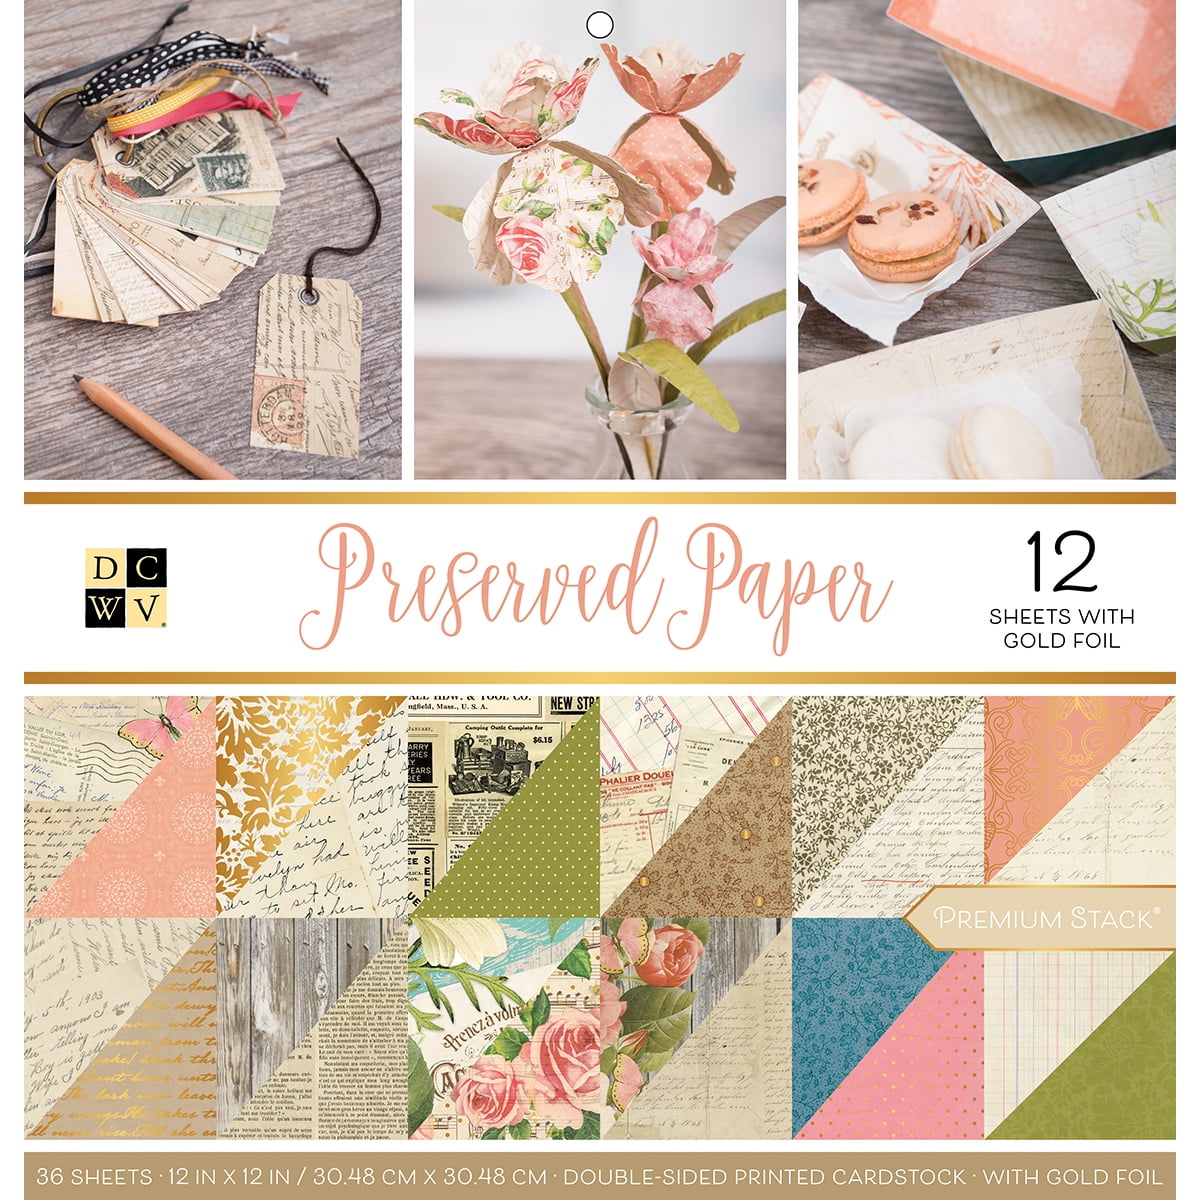 Cardstock 8.5 x 11 Paper Pack - Assorted Colored Scrapbook Paper 65lb -  Double Sided Card Stock for Crafts Embossing Cardmaking - 50 Sheets Solid  Core Greens